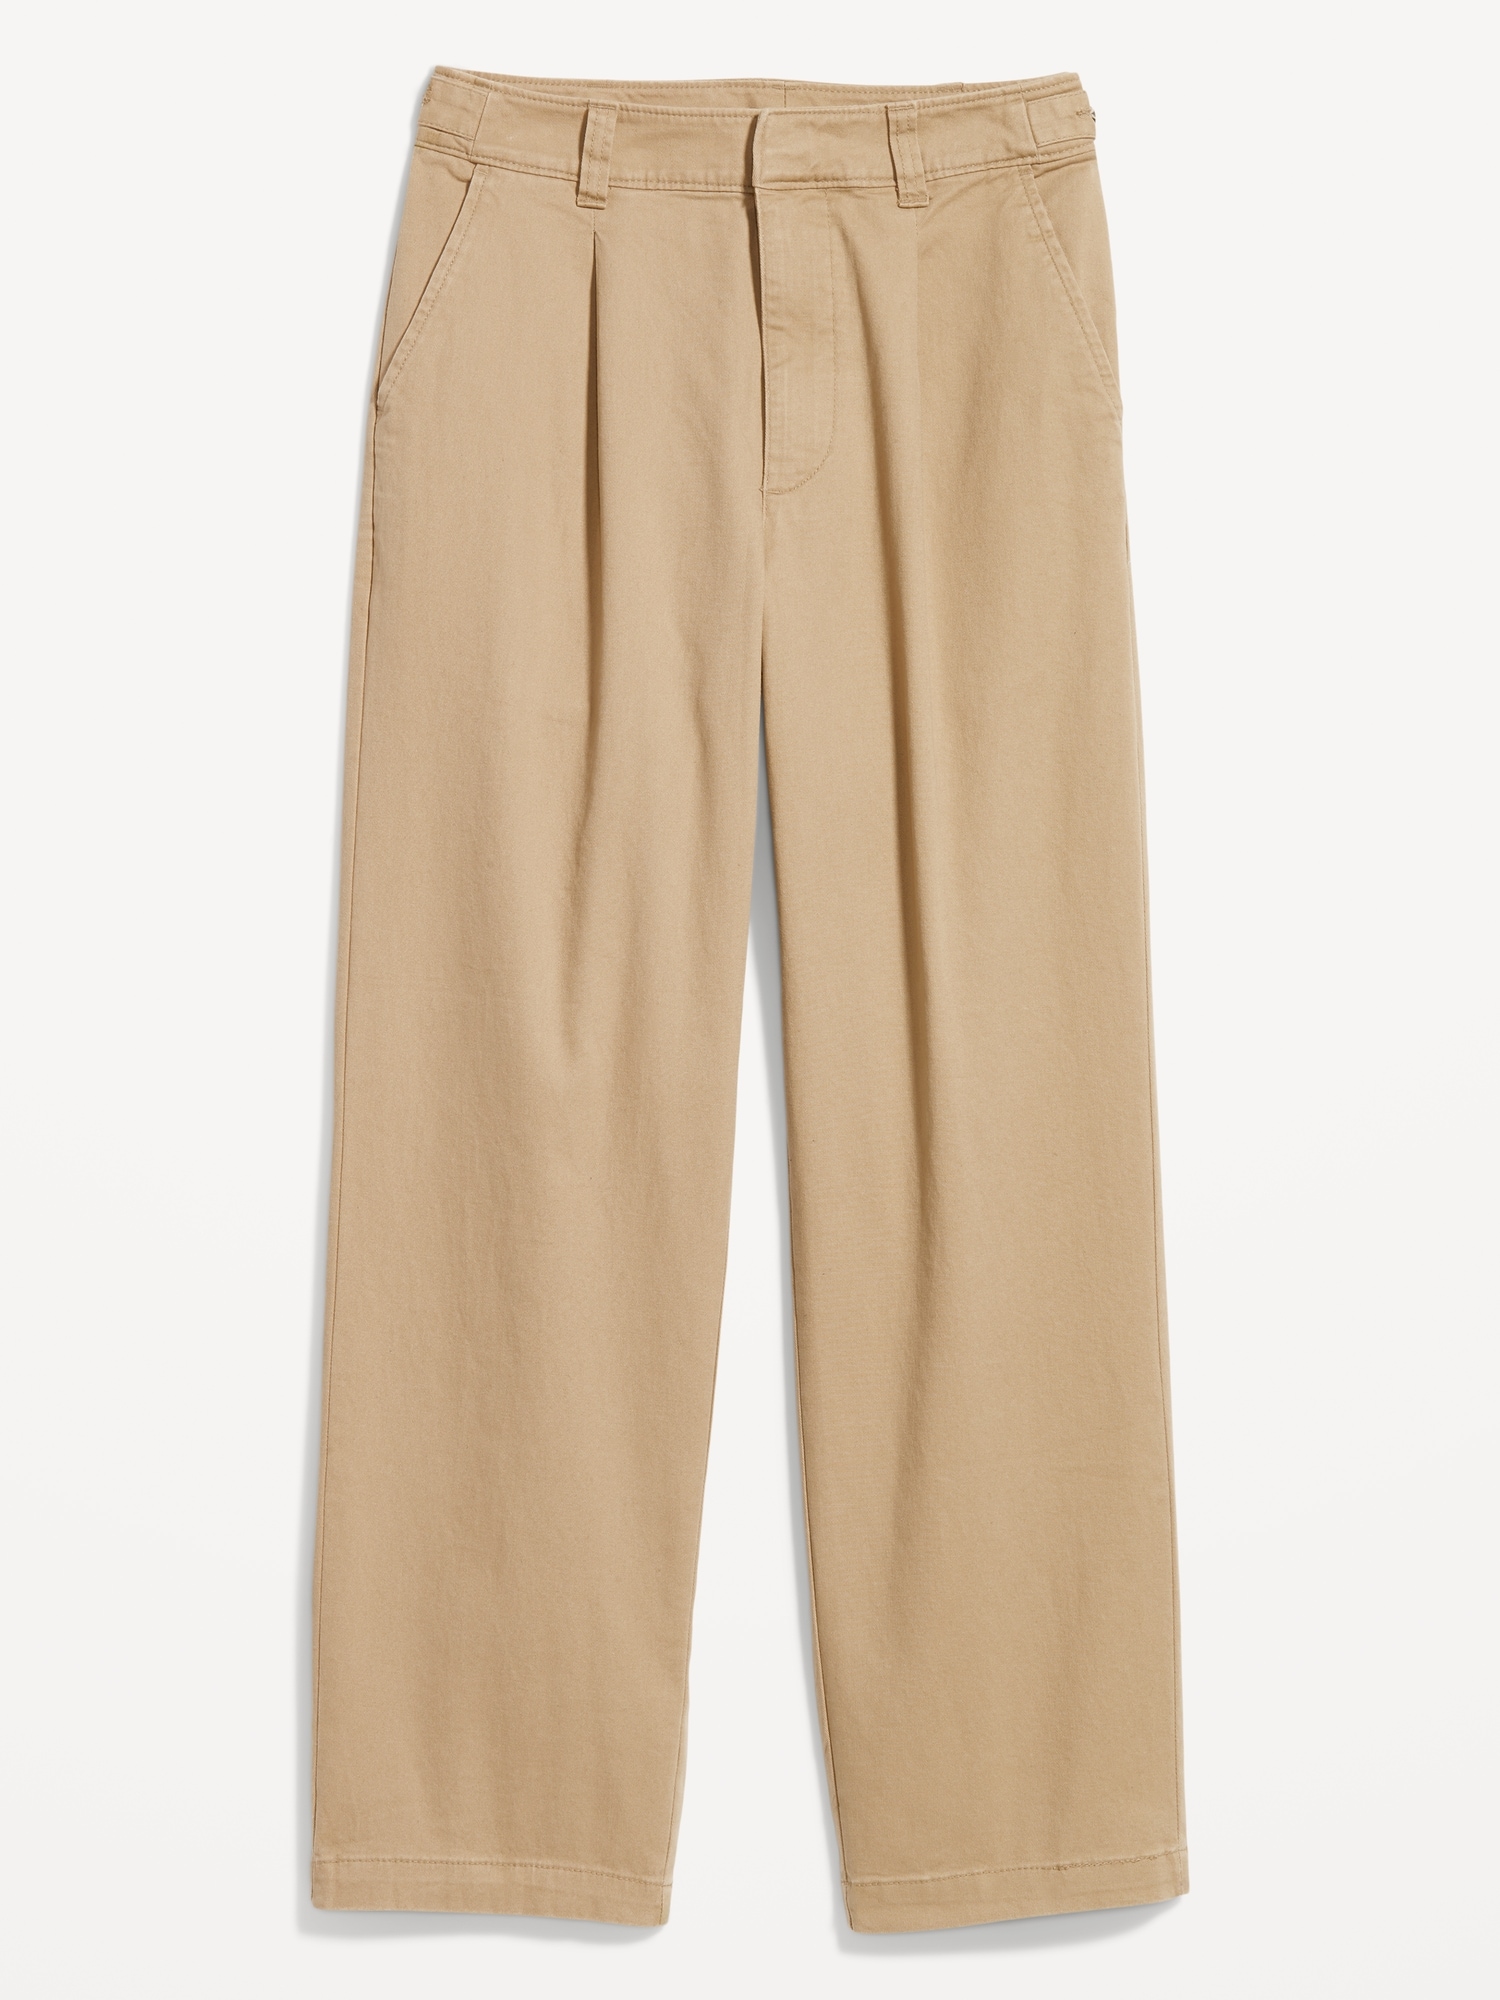 High-Waisted Chino Ankle Pants | Old Navy